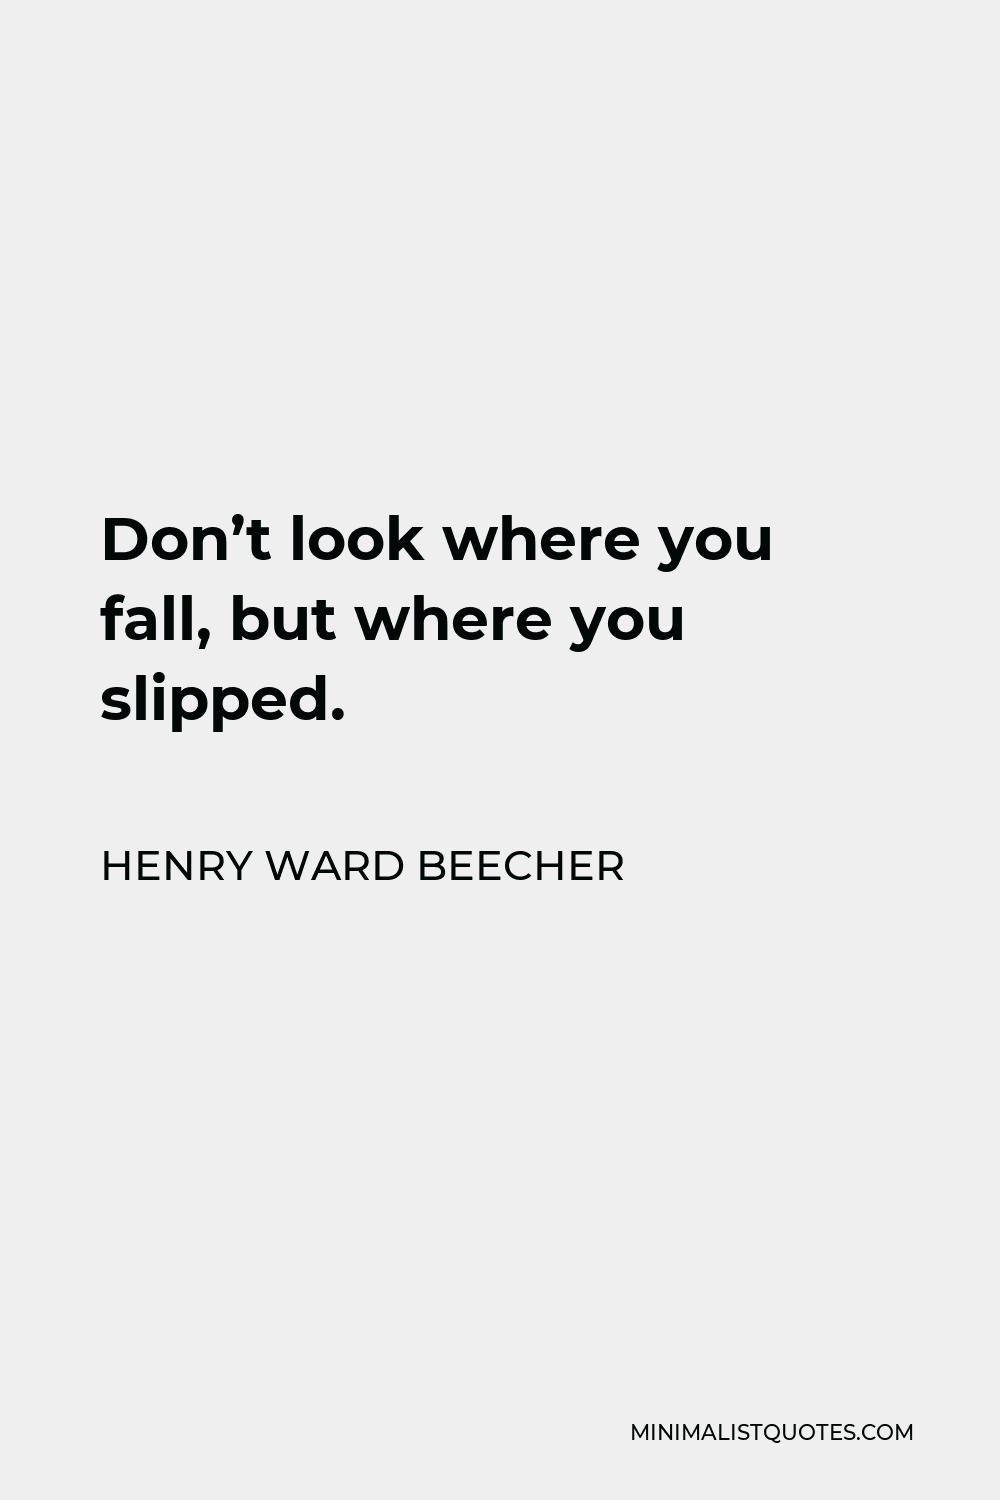 Henry Ward Beecher Quote - Don’t look where you fall, but where you slipped.